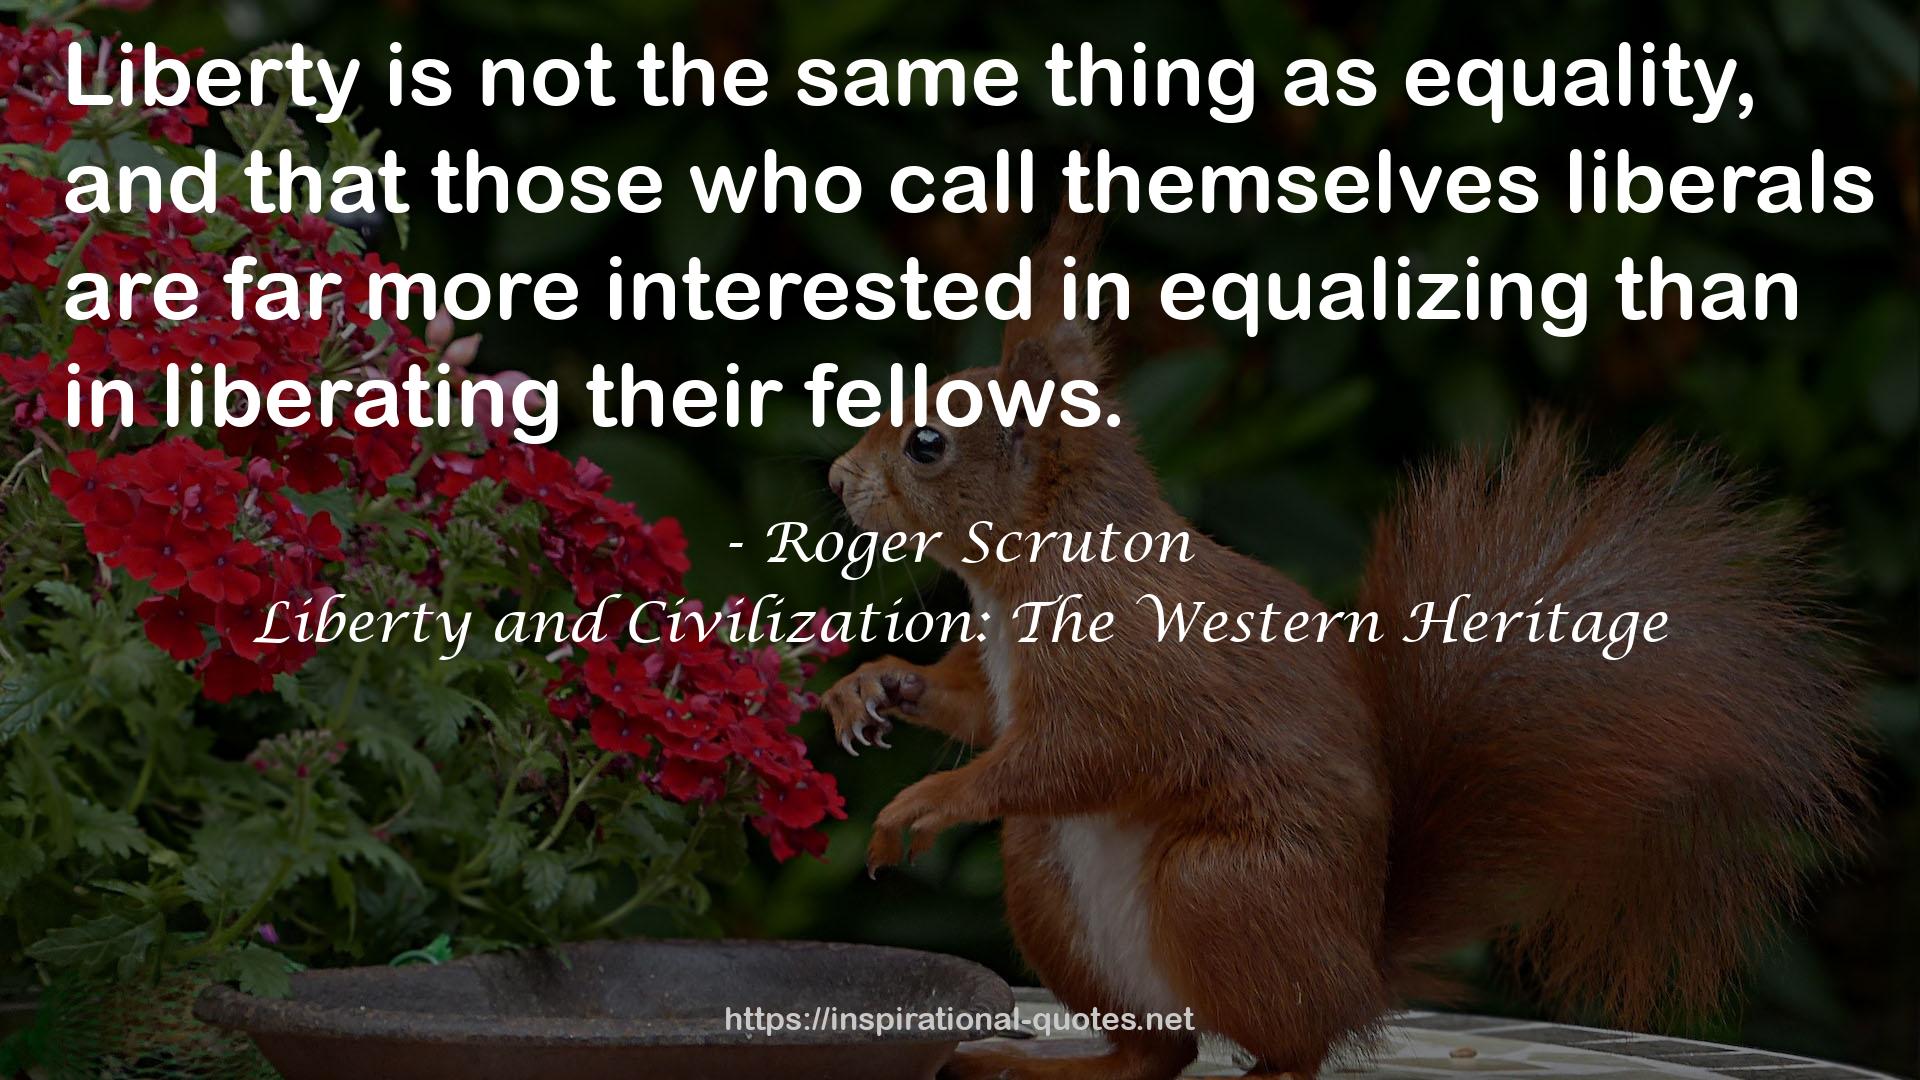 Liberty and Civilization: The Western Heritage QUOTES